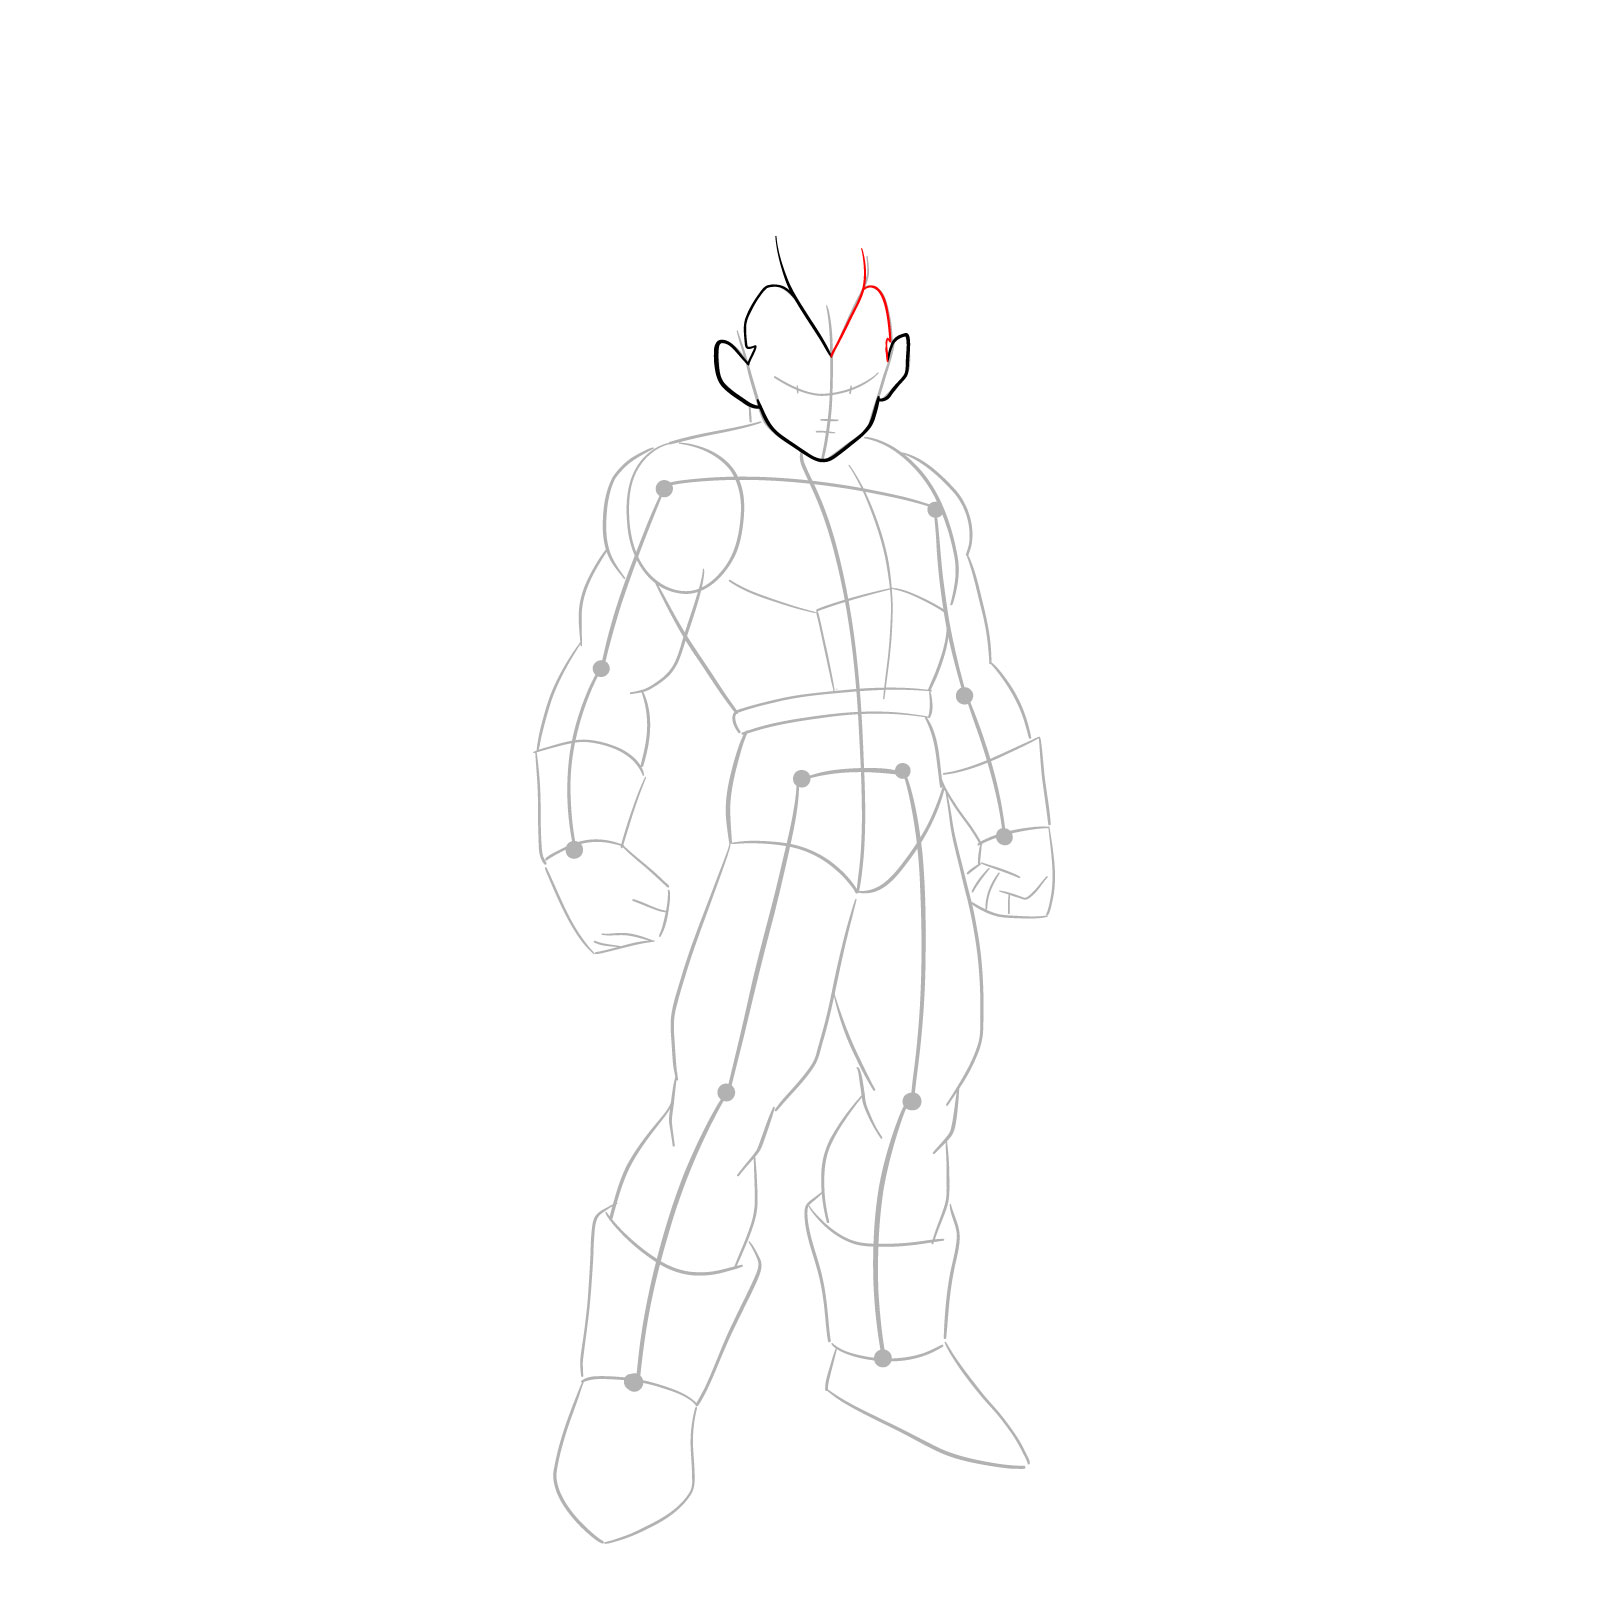 How to draw Vegeta in SSGSS - step 07